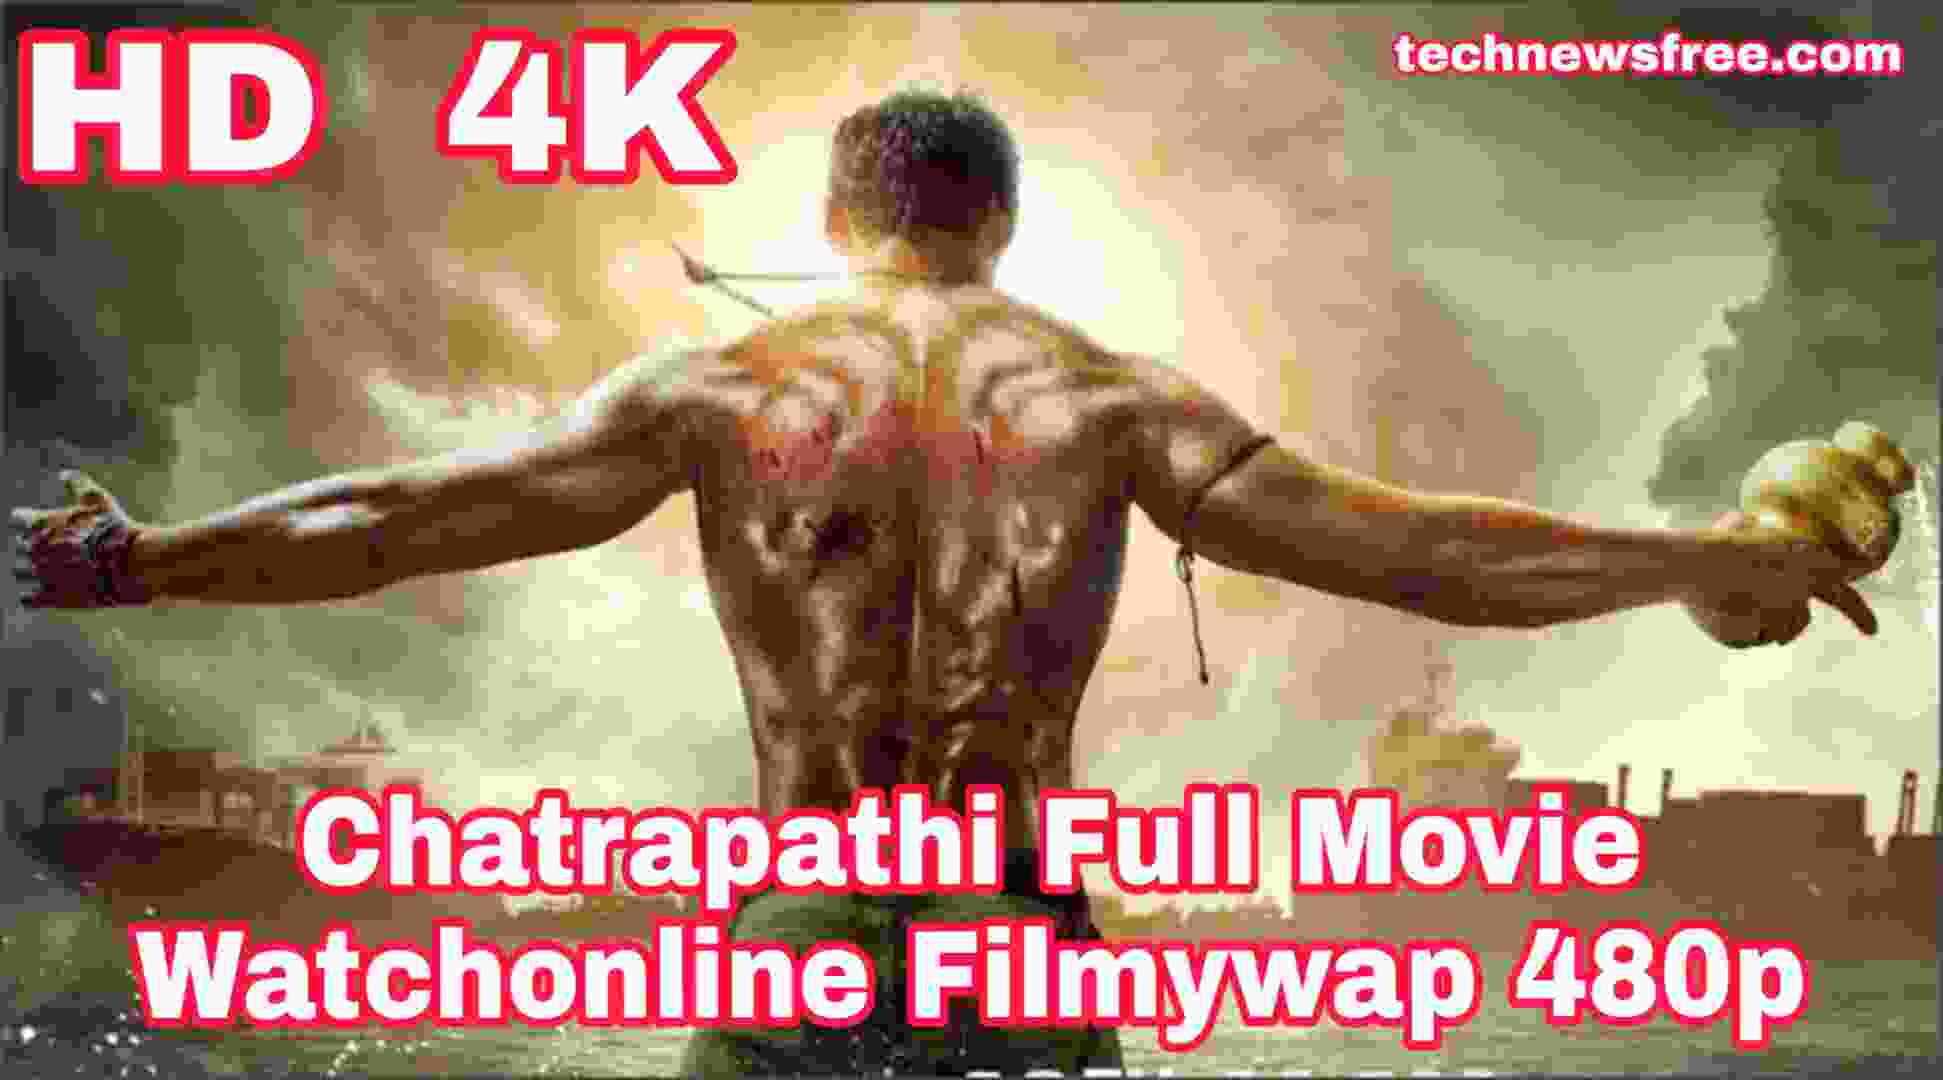 Chatrapathi-Full-Movie-Watchonline-Filmywap-480p